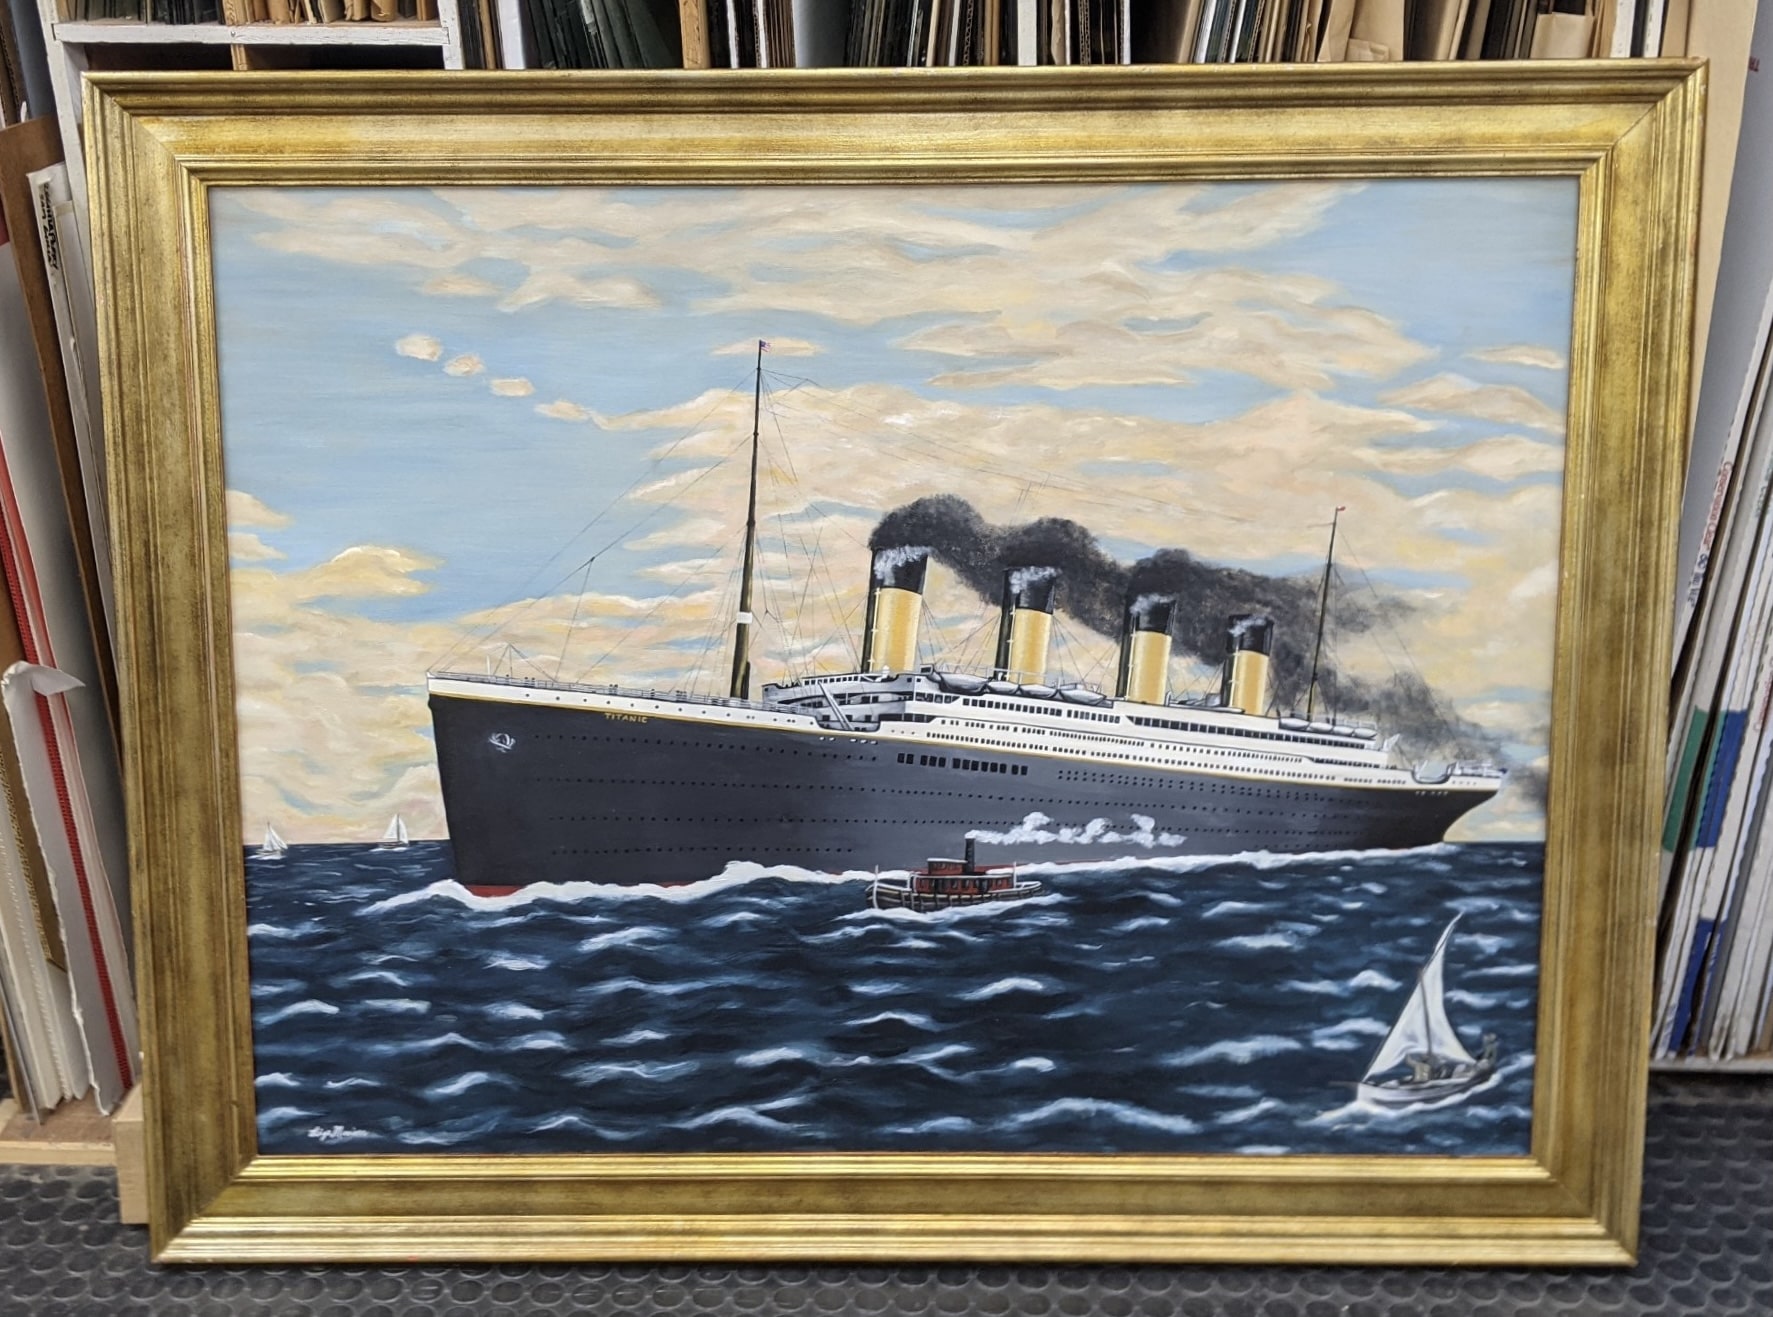 Oil painting of the Titanic framed